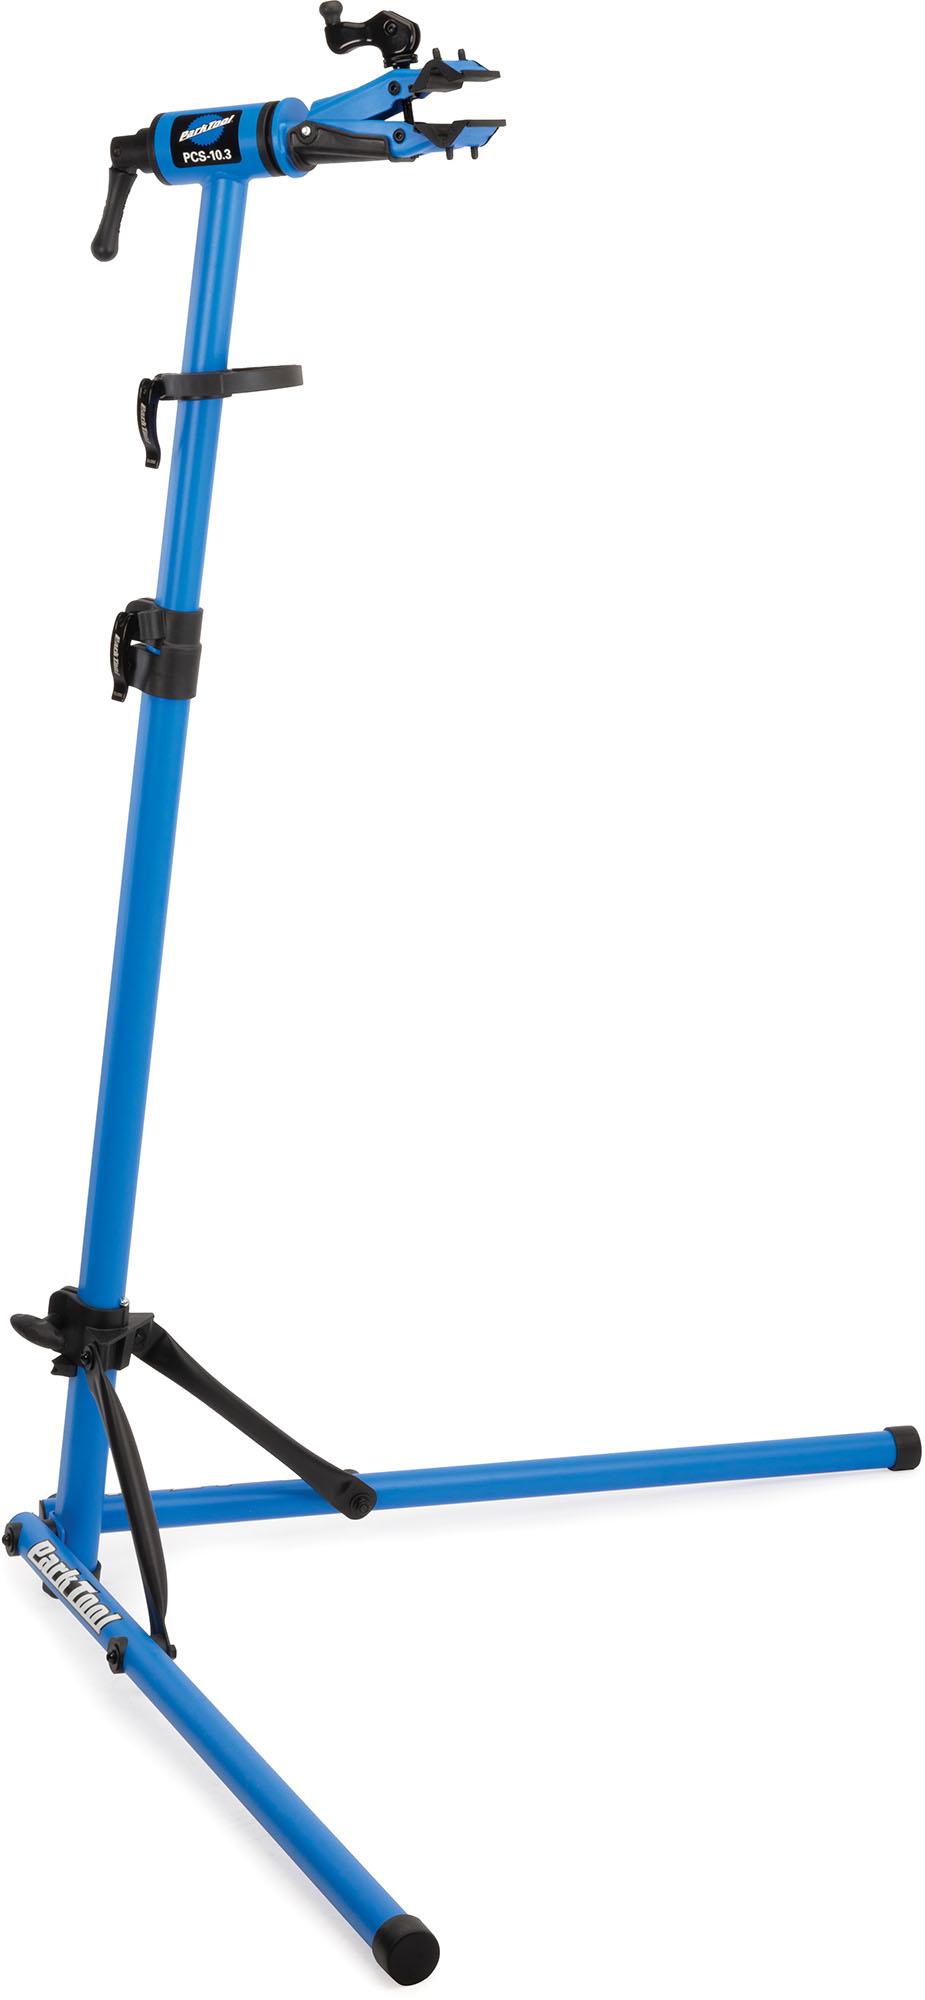 Park Tool Home Mechanic Deluxe Workstand Pcs10.3  Blue